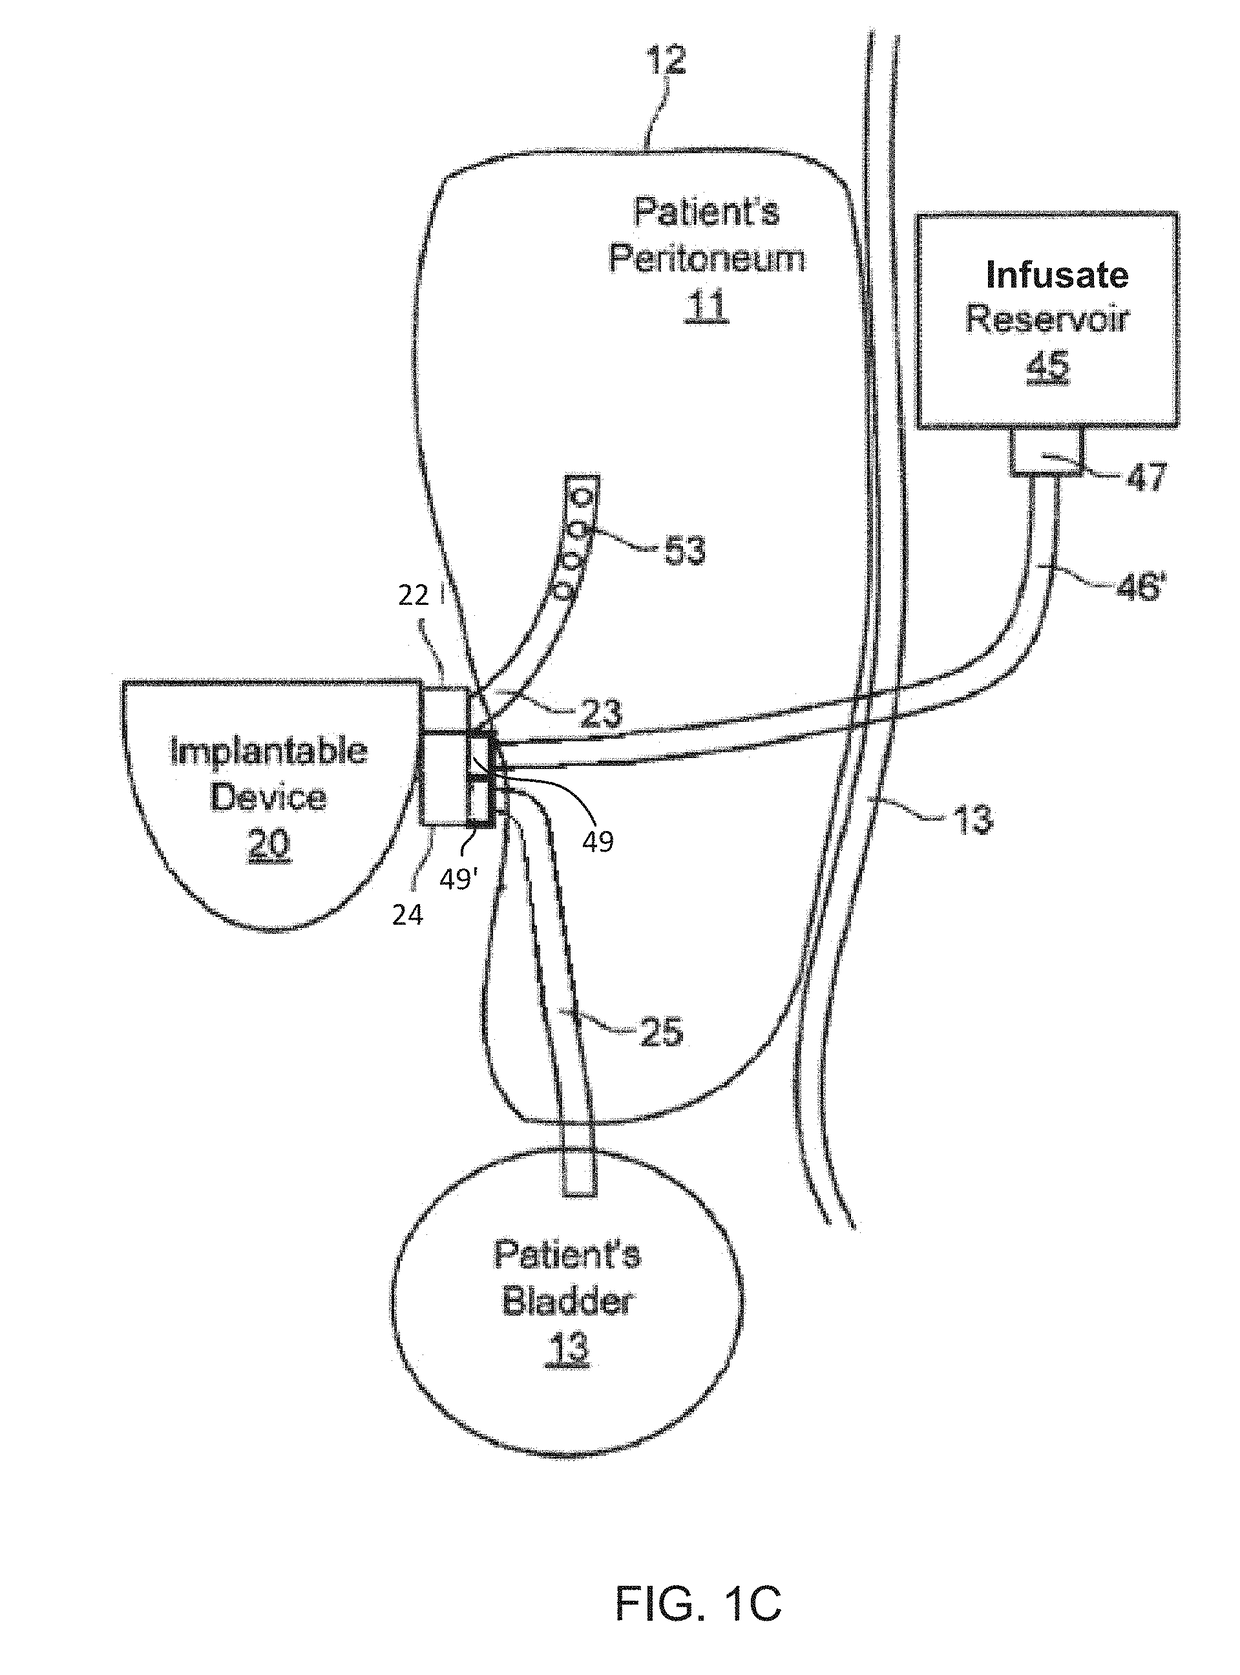 Direct sodium removal method, solution and apparatus to reduce fluid overload in heart failure patients